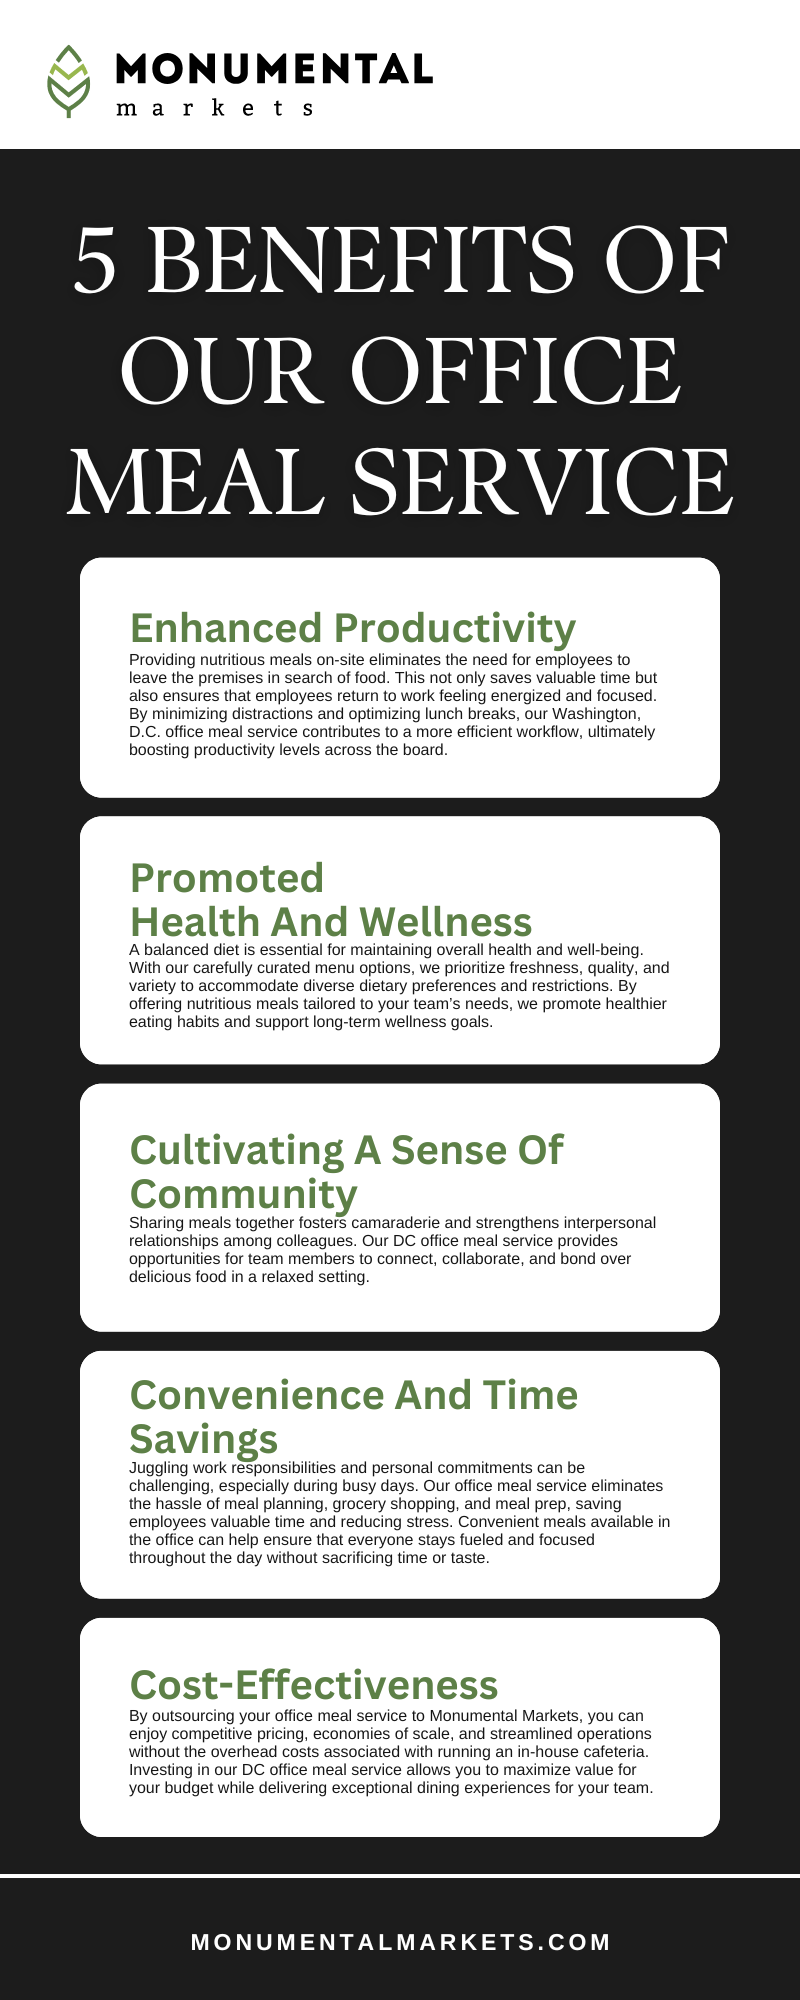 5 Benefits Of Our Office Meal Service Infographic